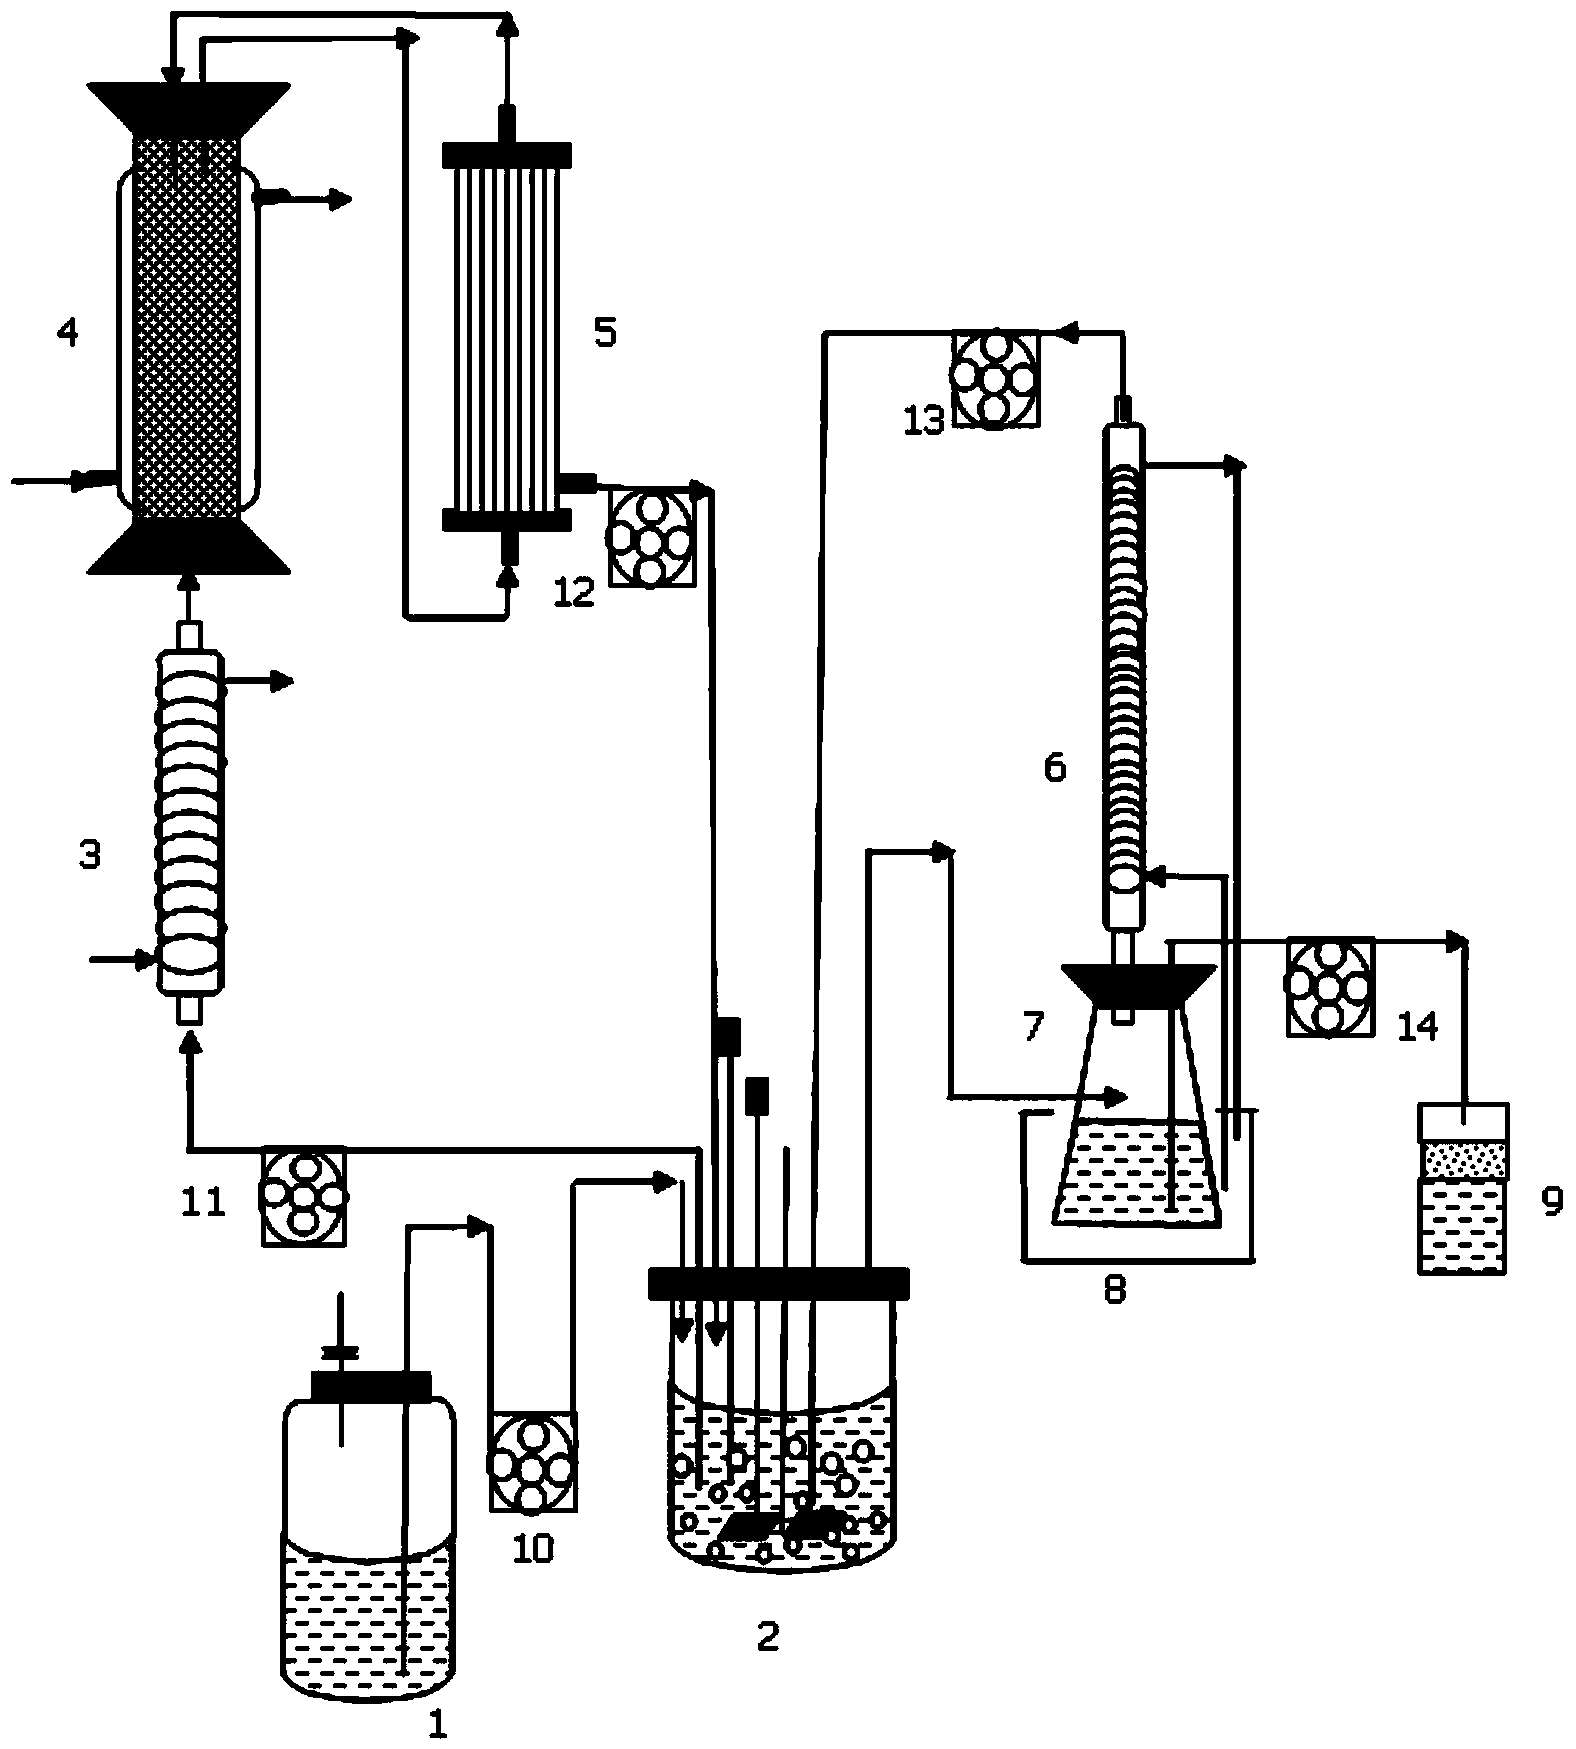 Device and method for preparing butanol through fermentation, coupling, separation and purification of acetone-butanol